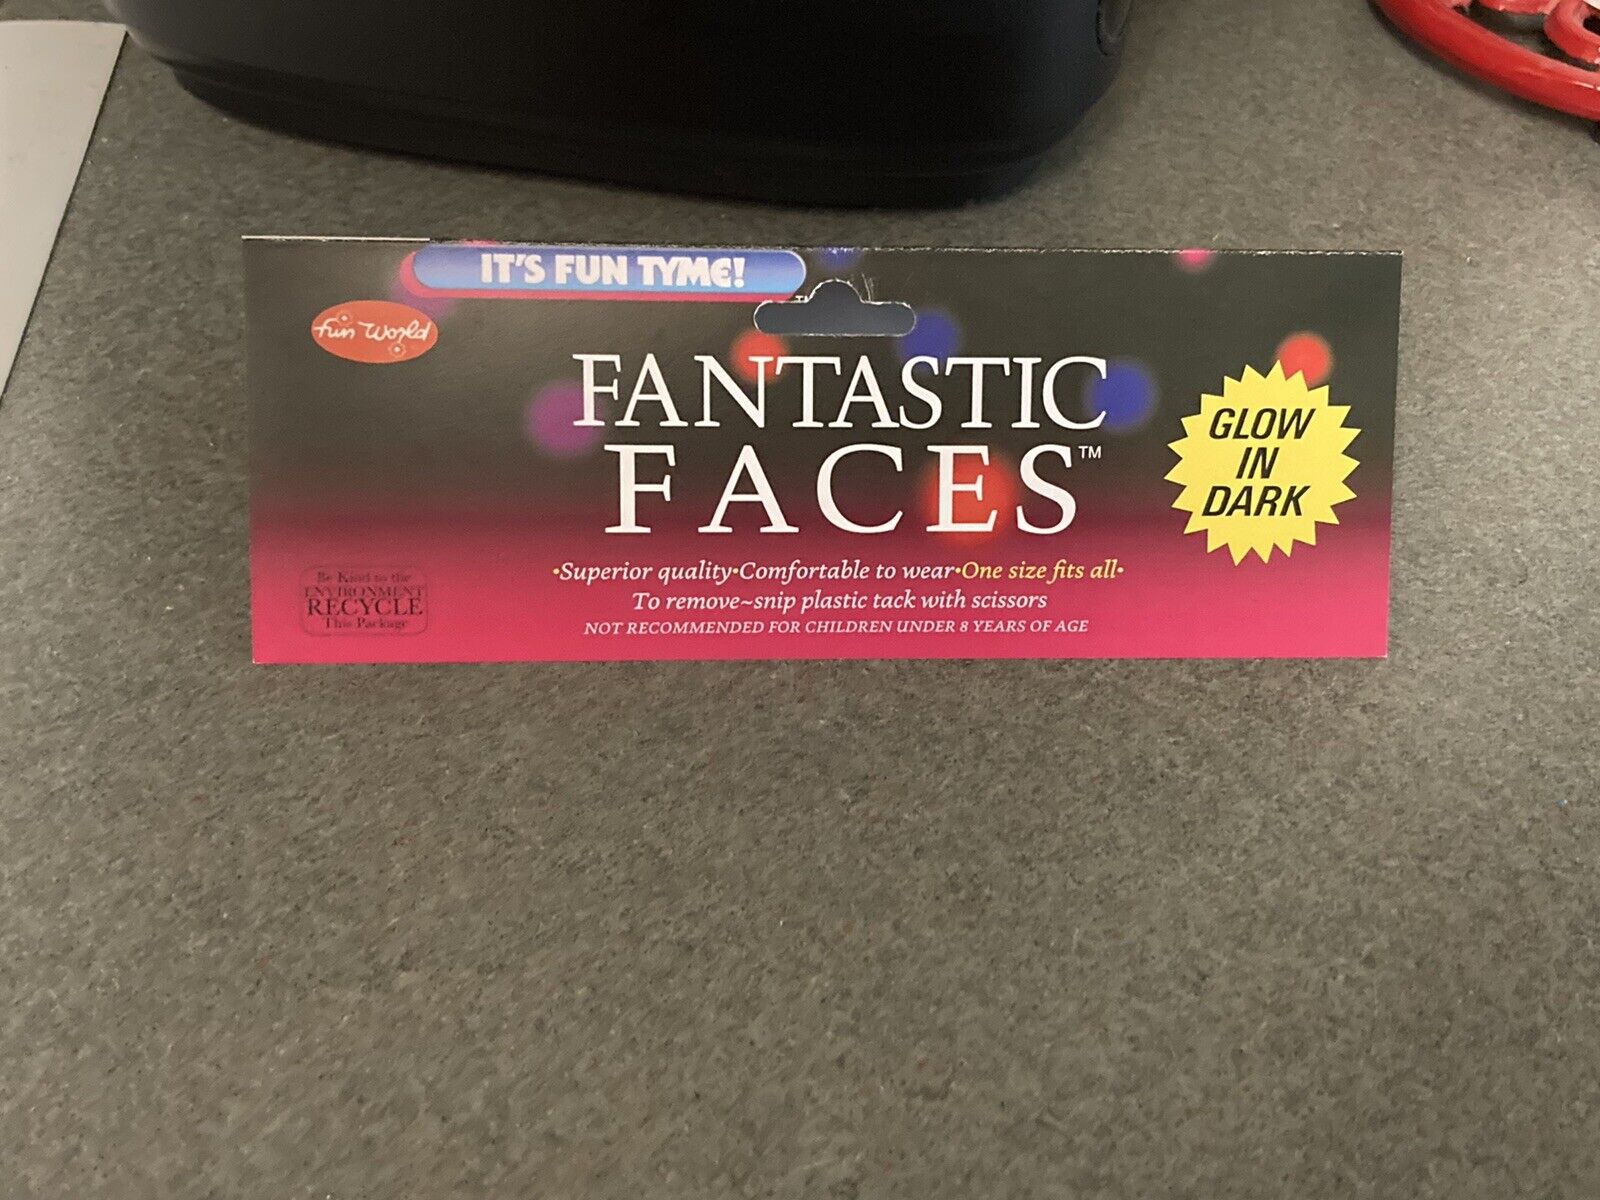 Replica Fantastic Faces Glow In The Dark Mask Tags (NOT AUTHENTIC)